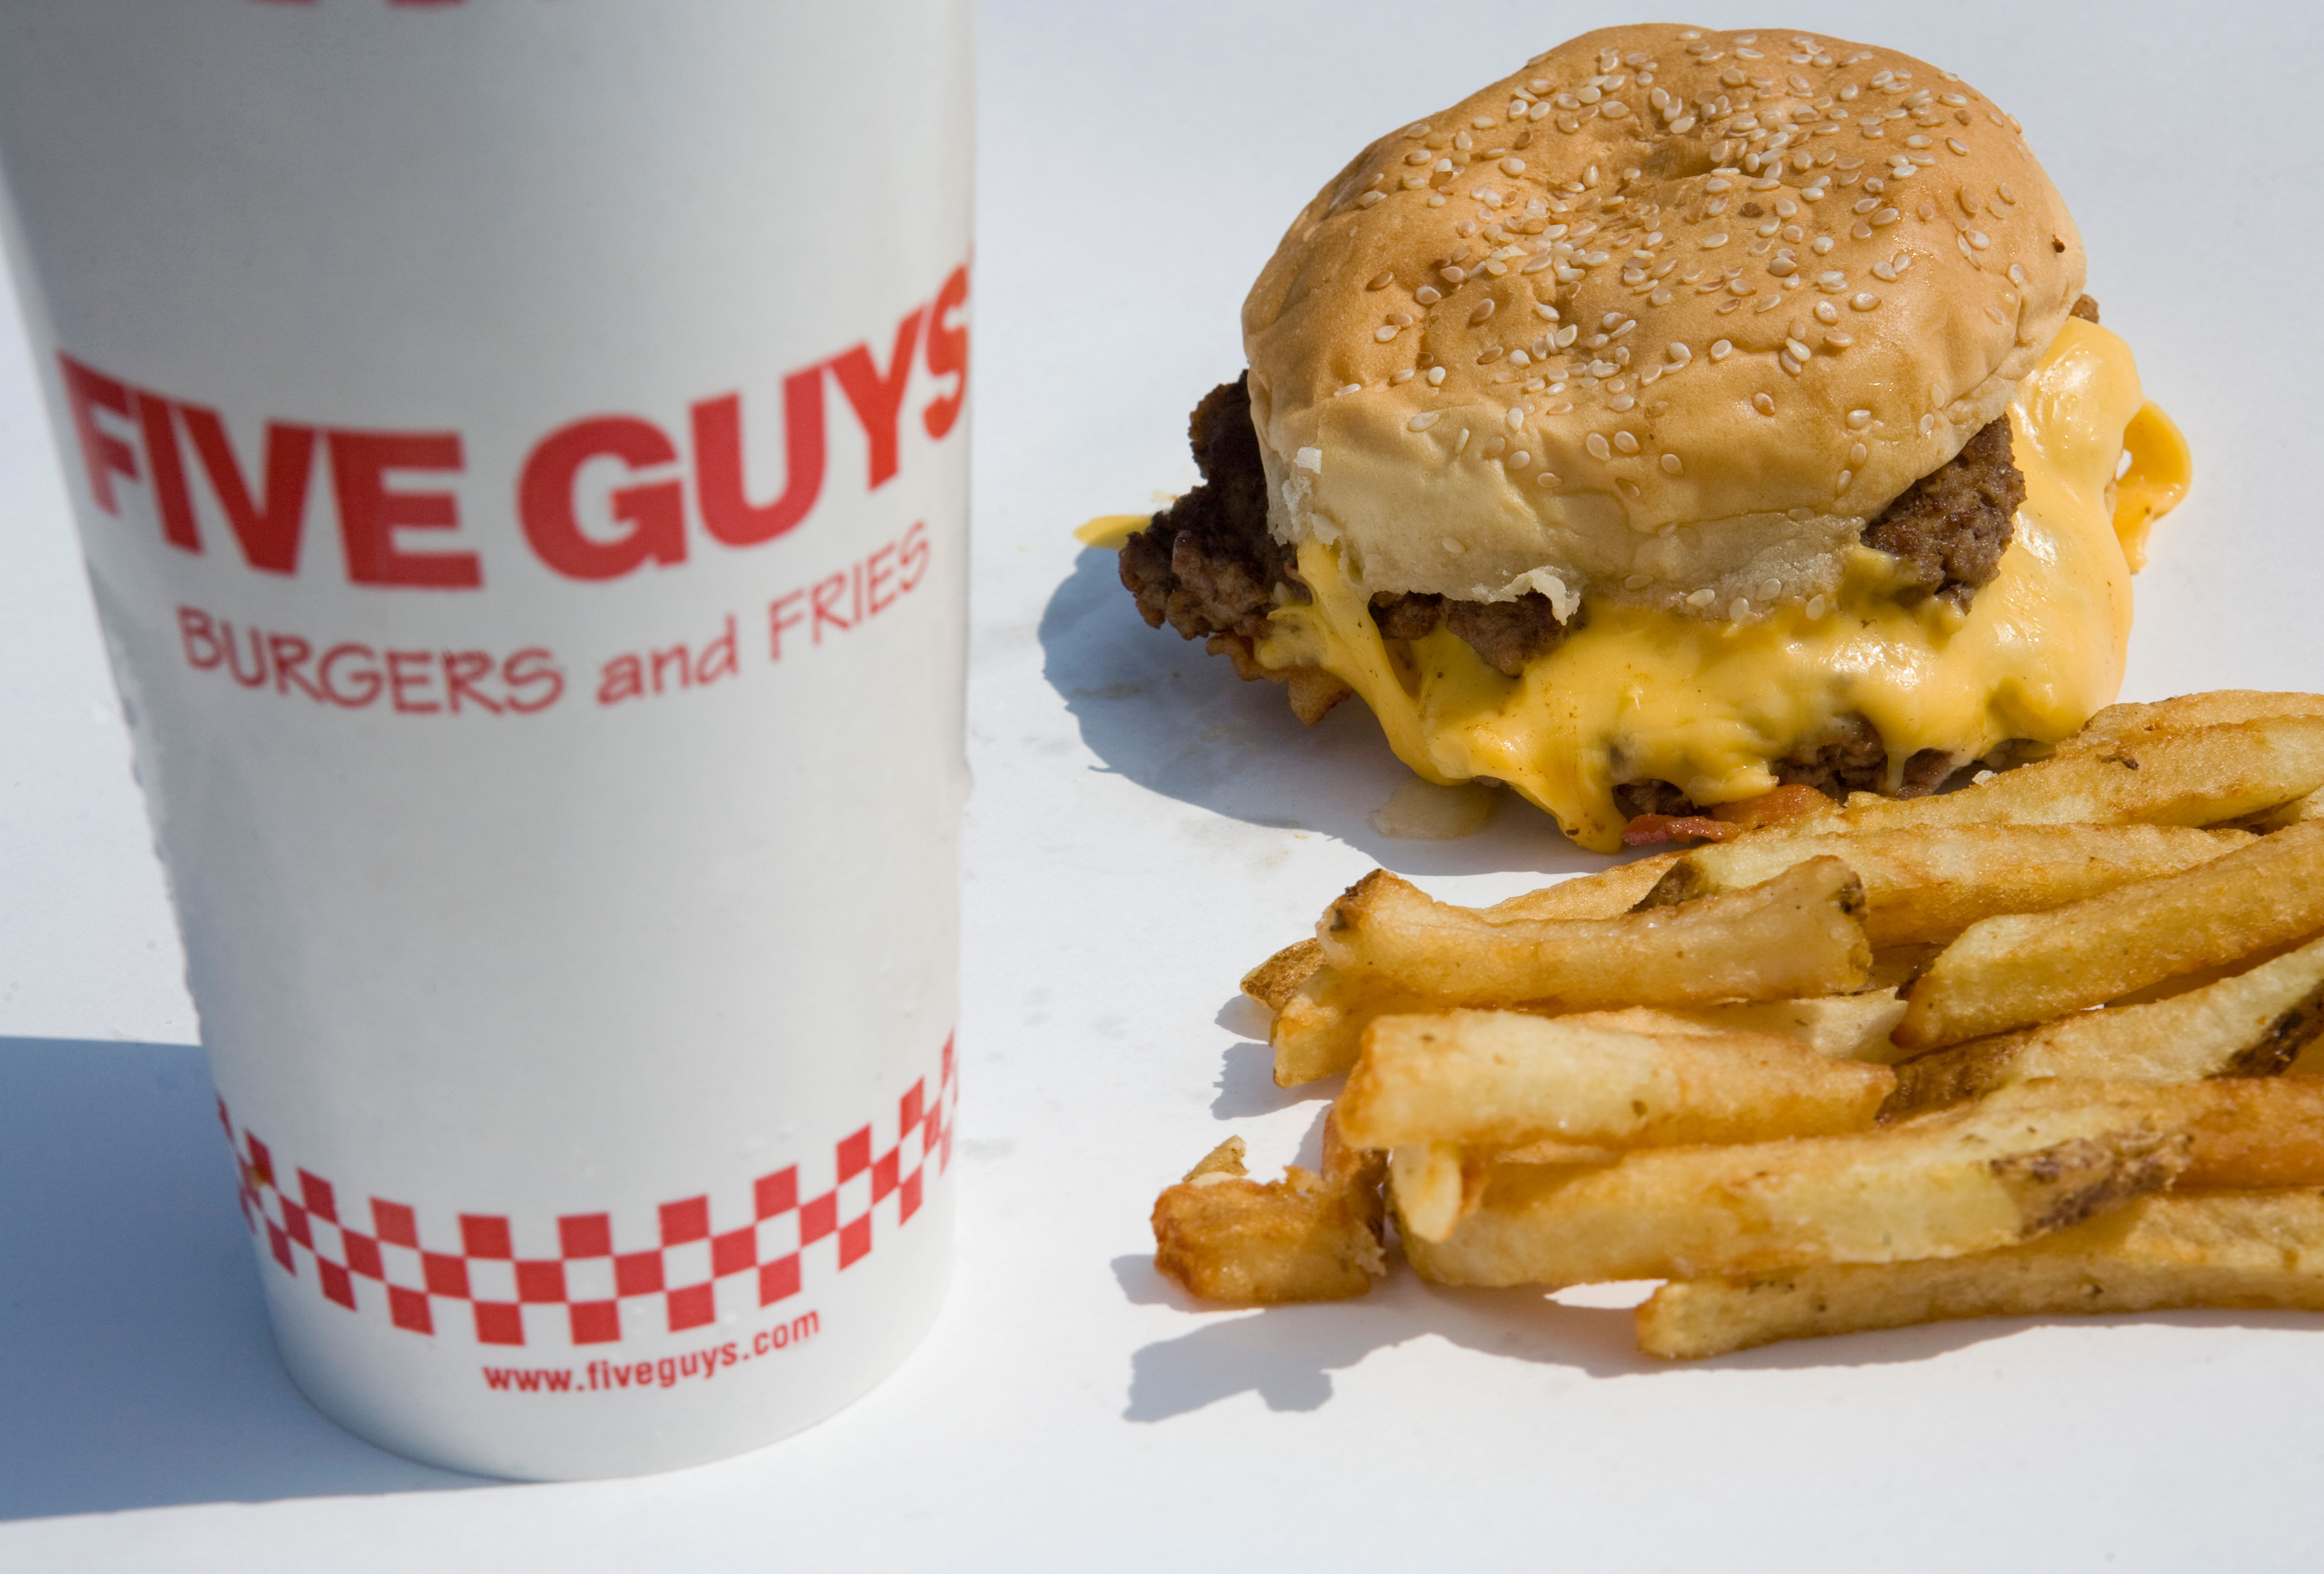 Five Guys Customer Slams Chain After Paying $22 for 'Small' Meal